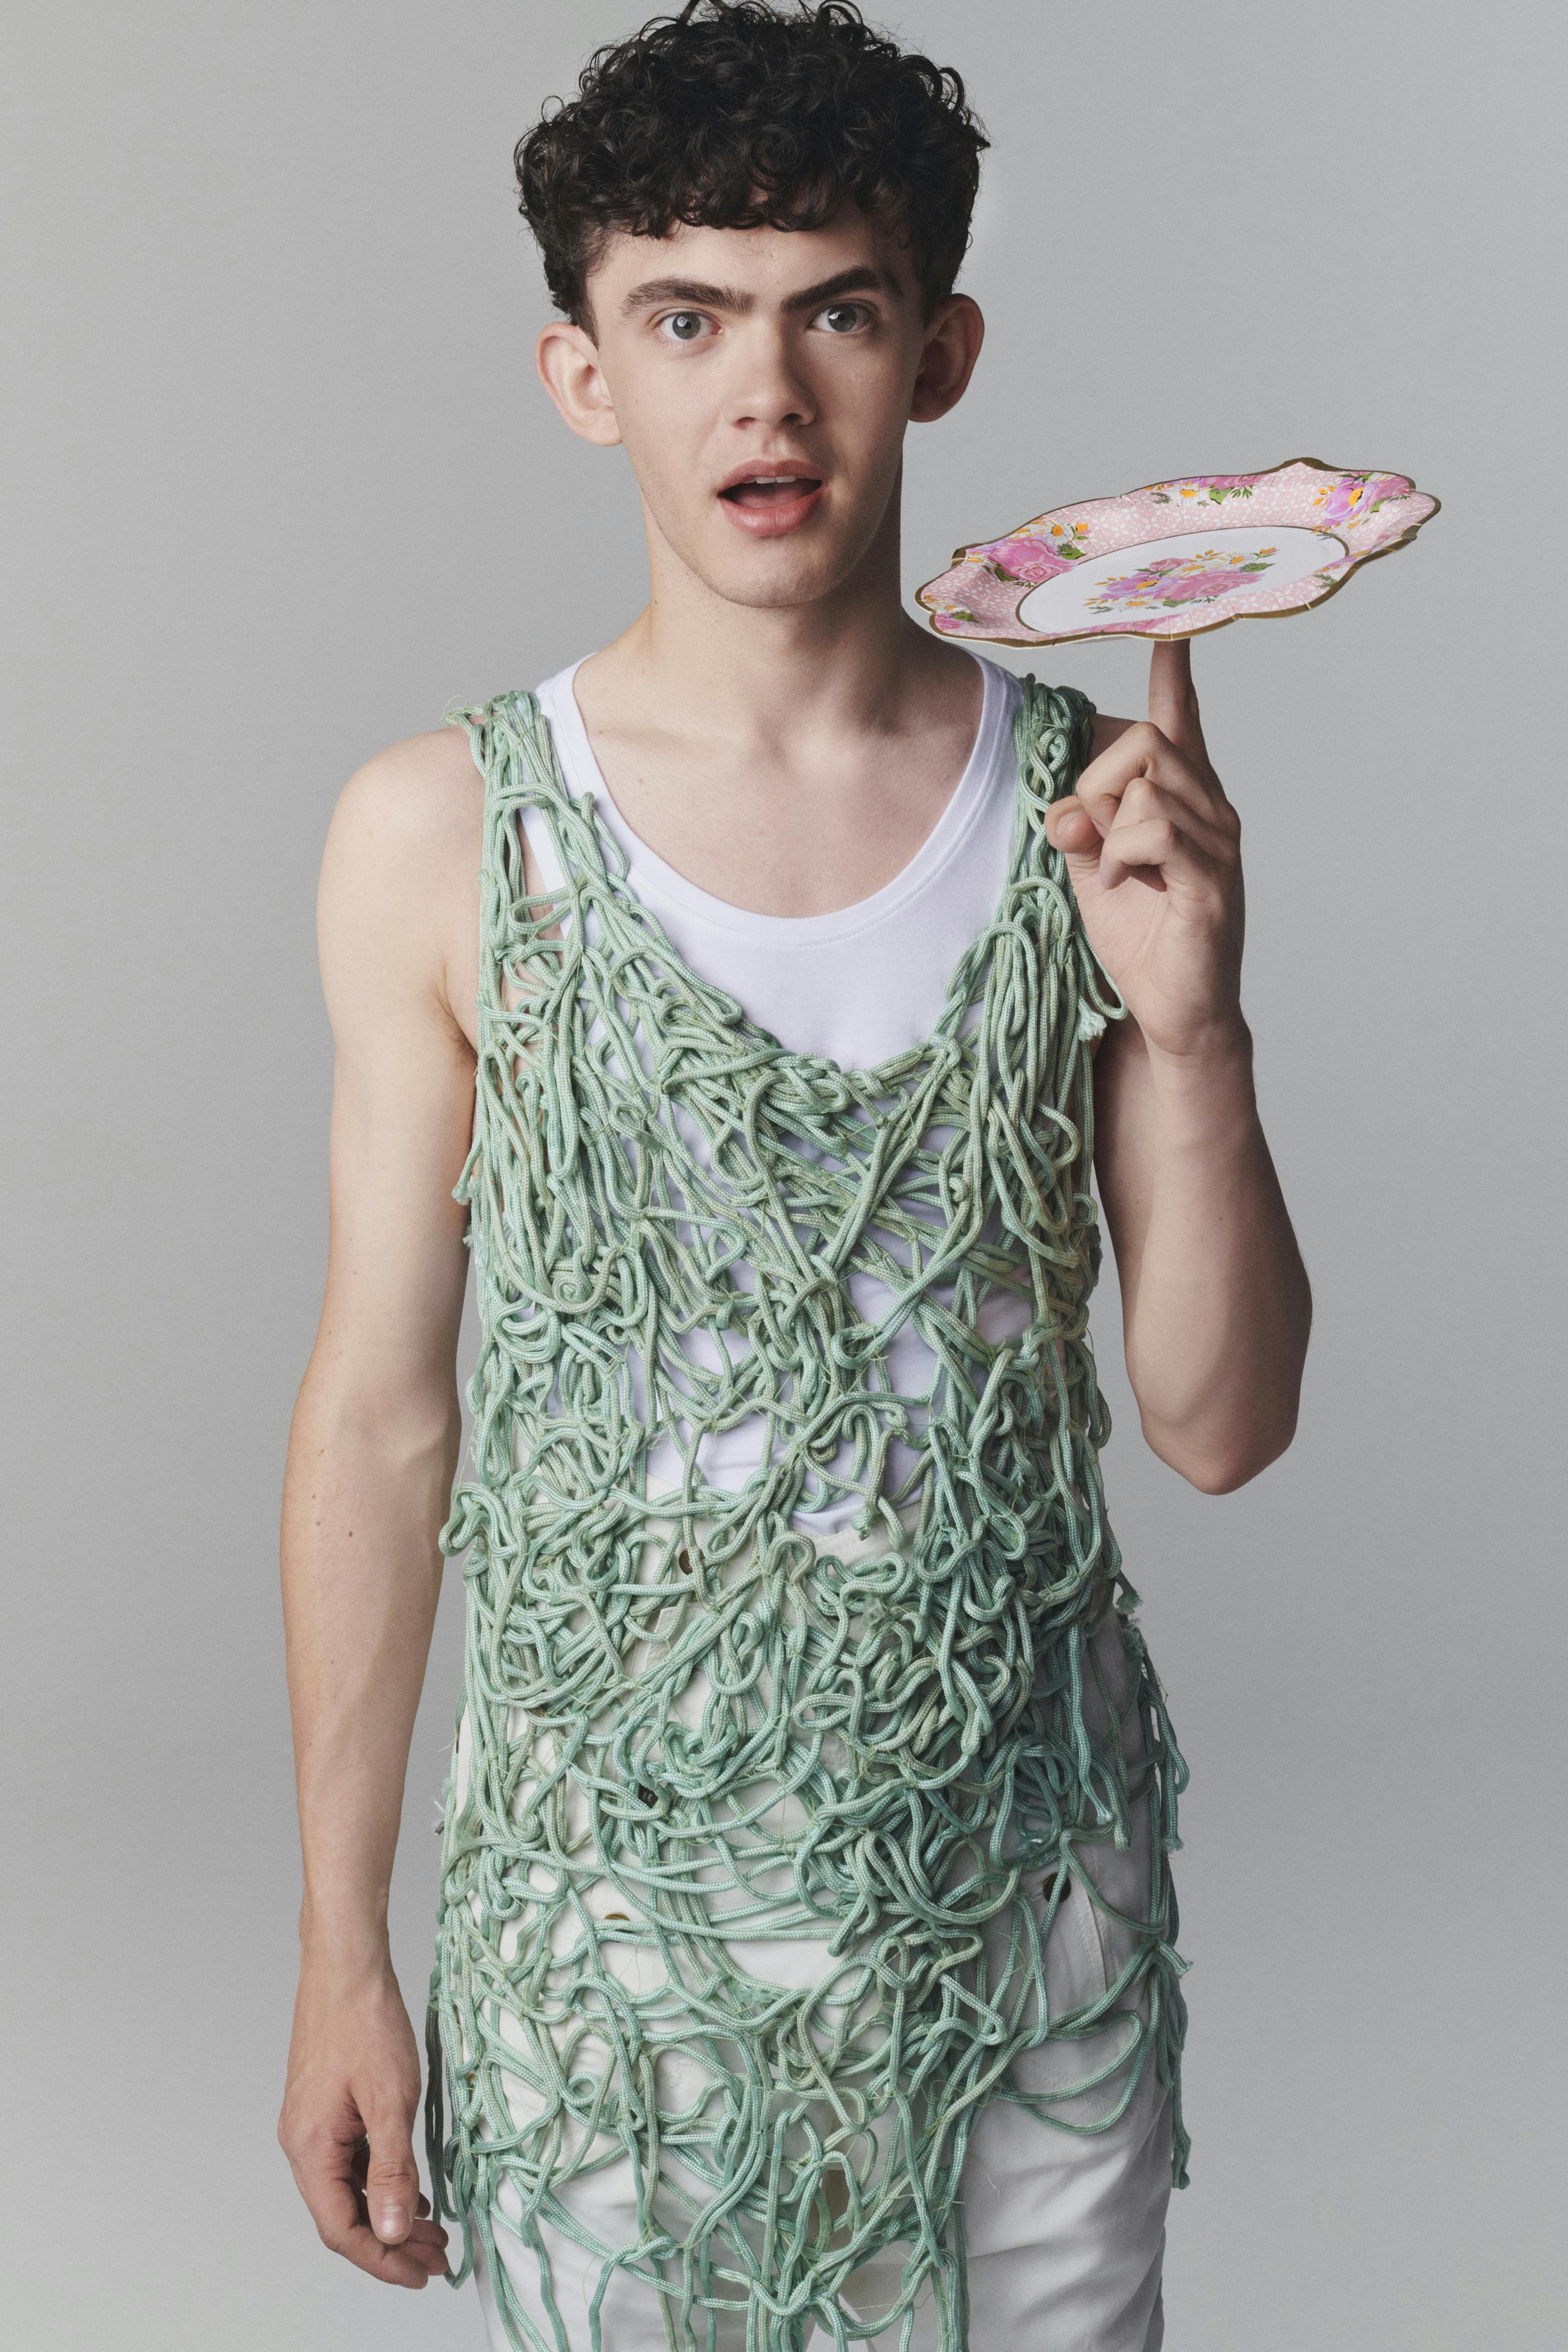 Joe Locke wears a green rope vest and white tank top, and spins a pink floral plate on his finger. 